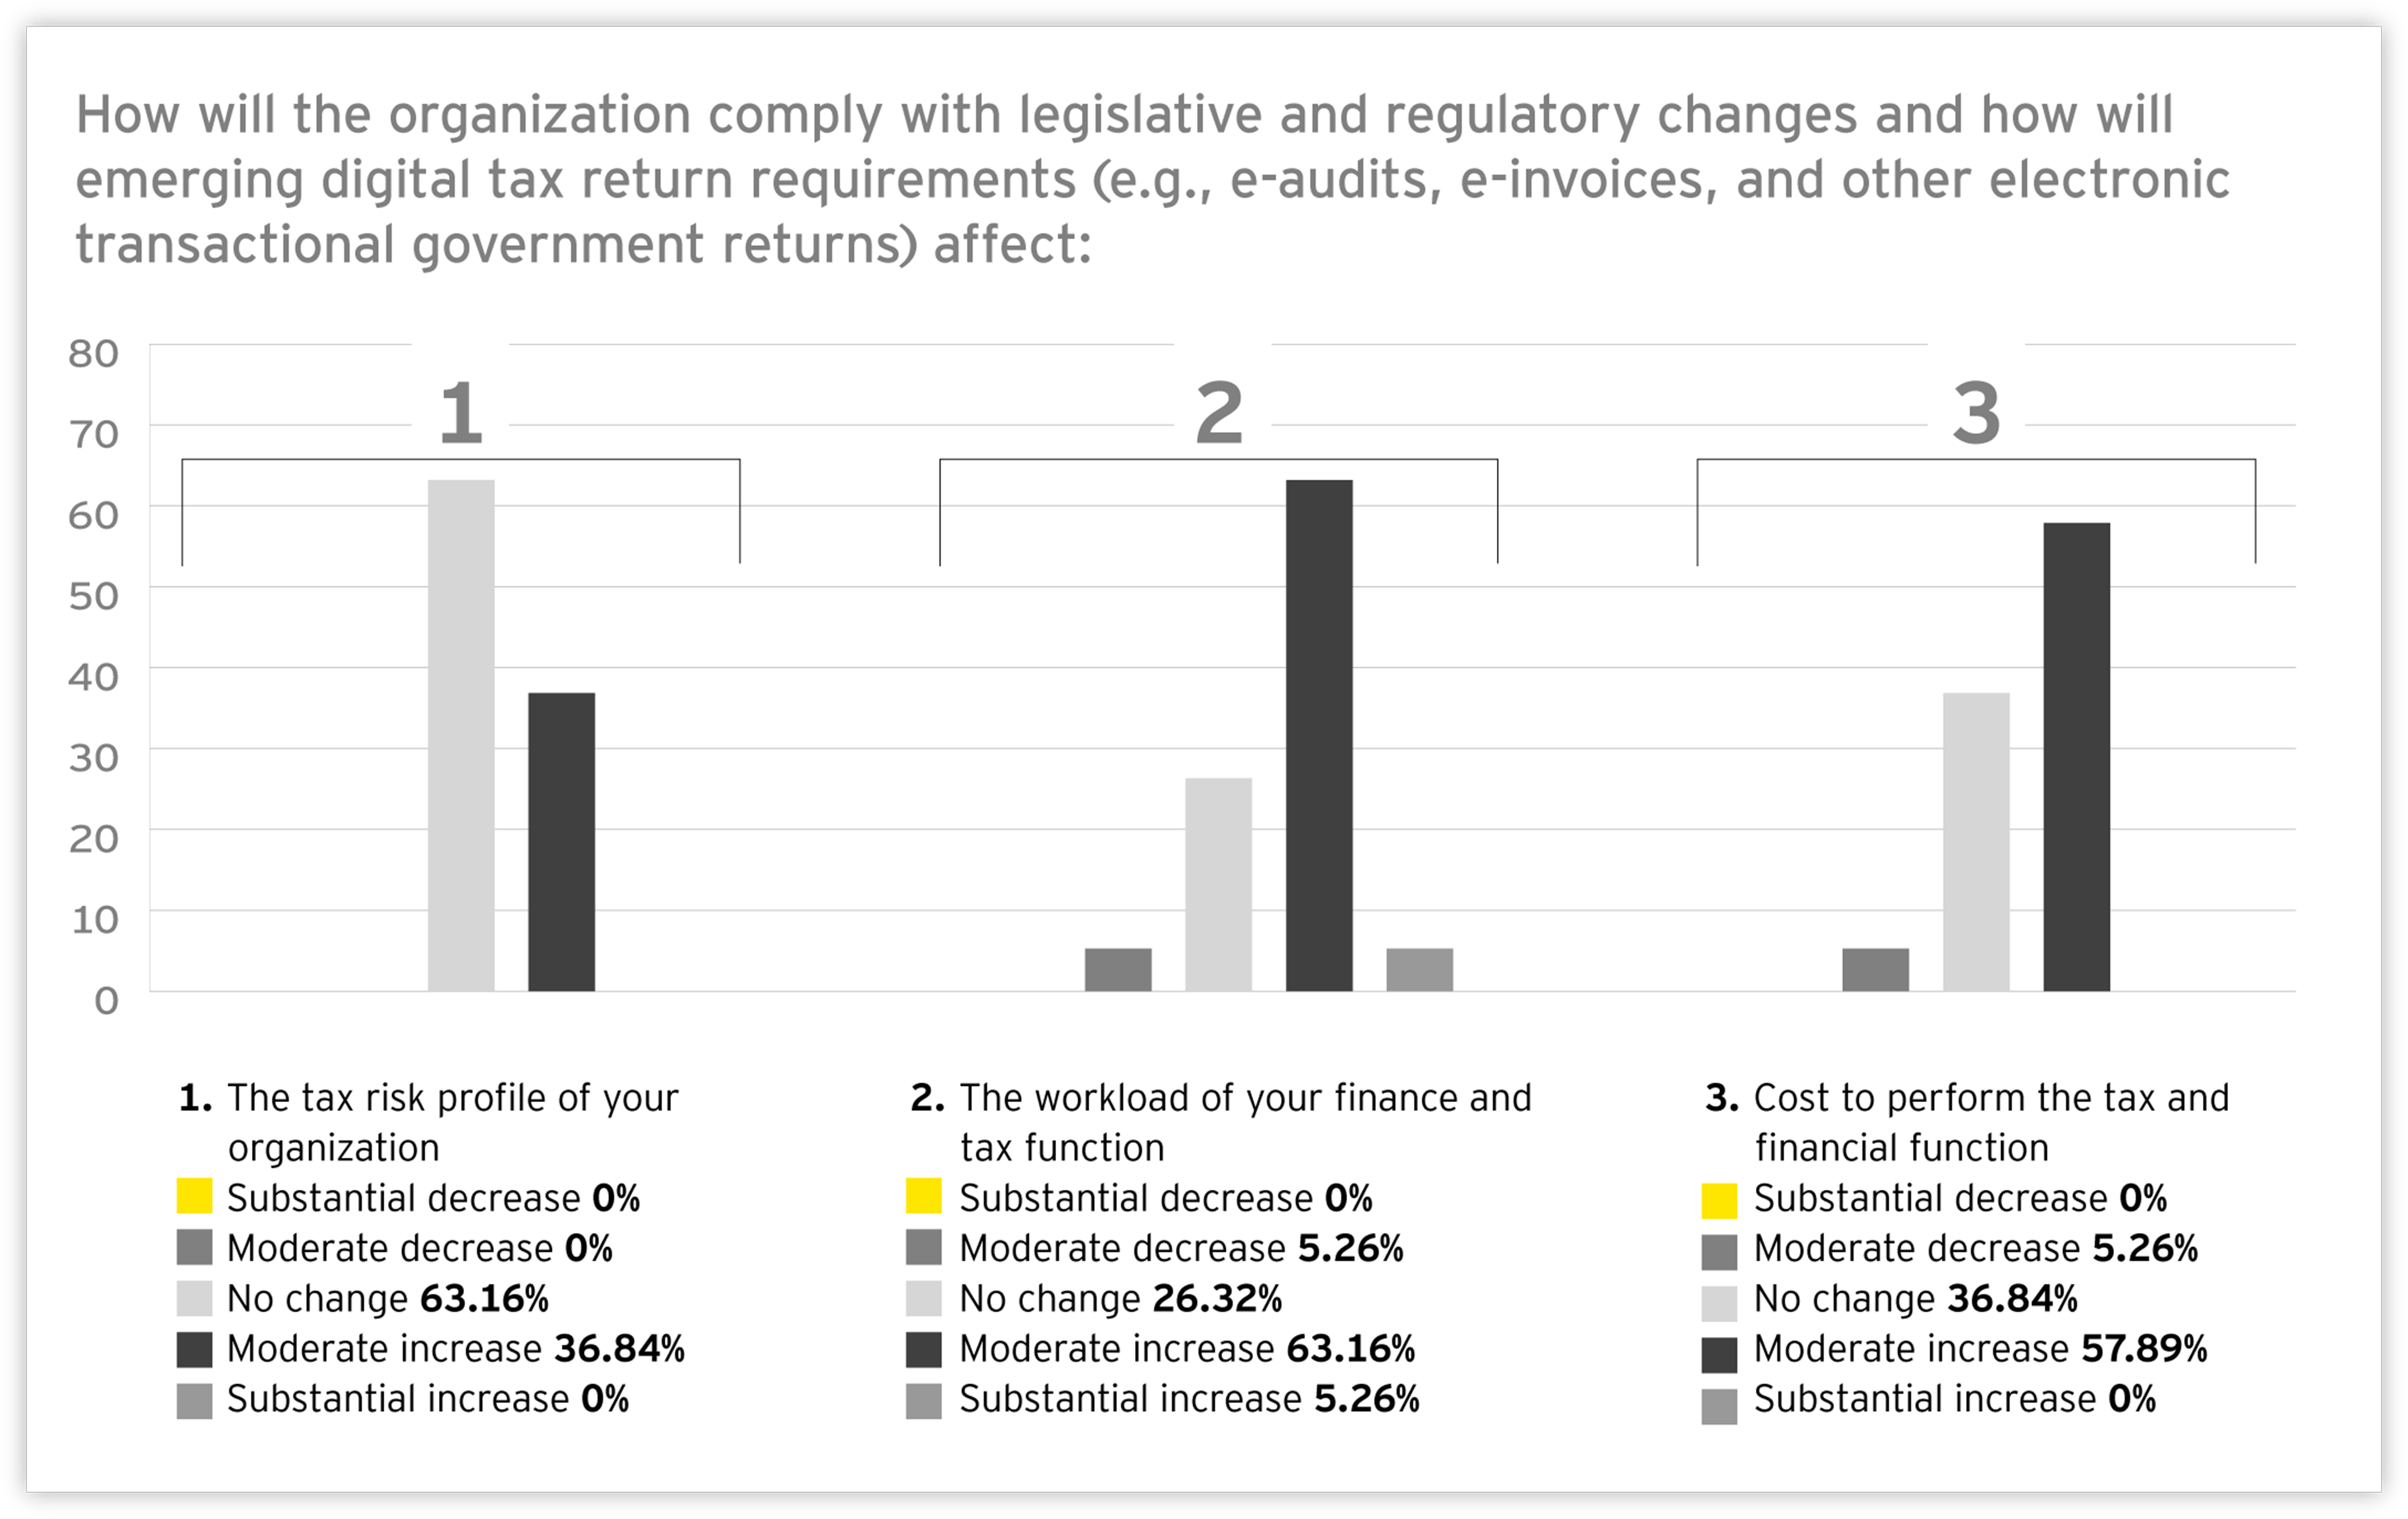 Graph: How will the organization comply with legislative and regulatory changes and how will emerging digital tax return requirements affect?